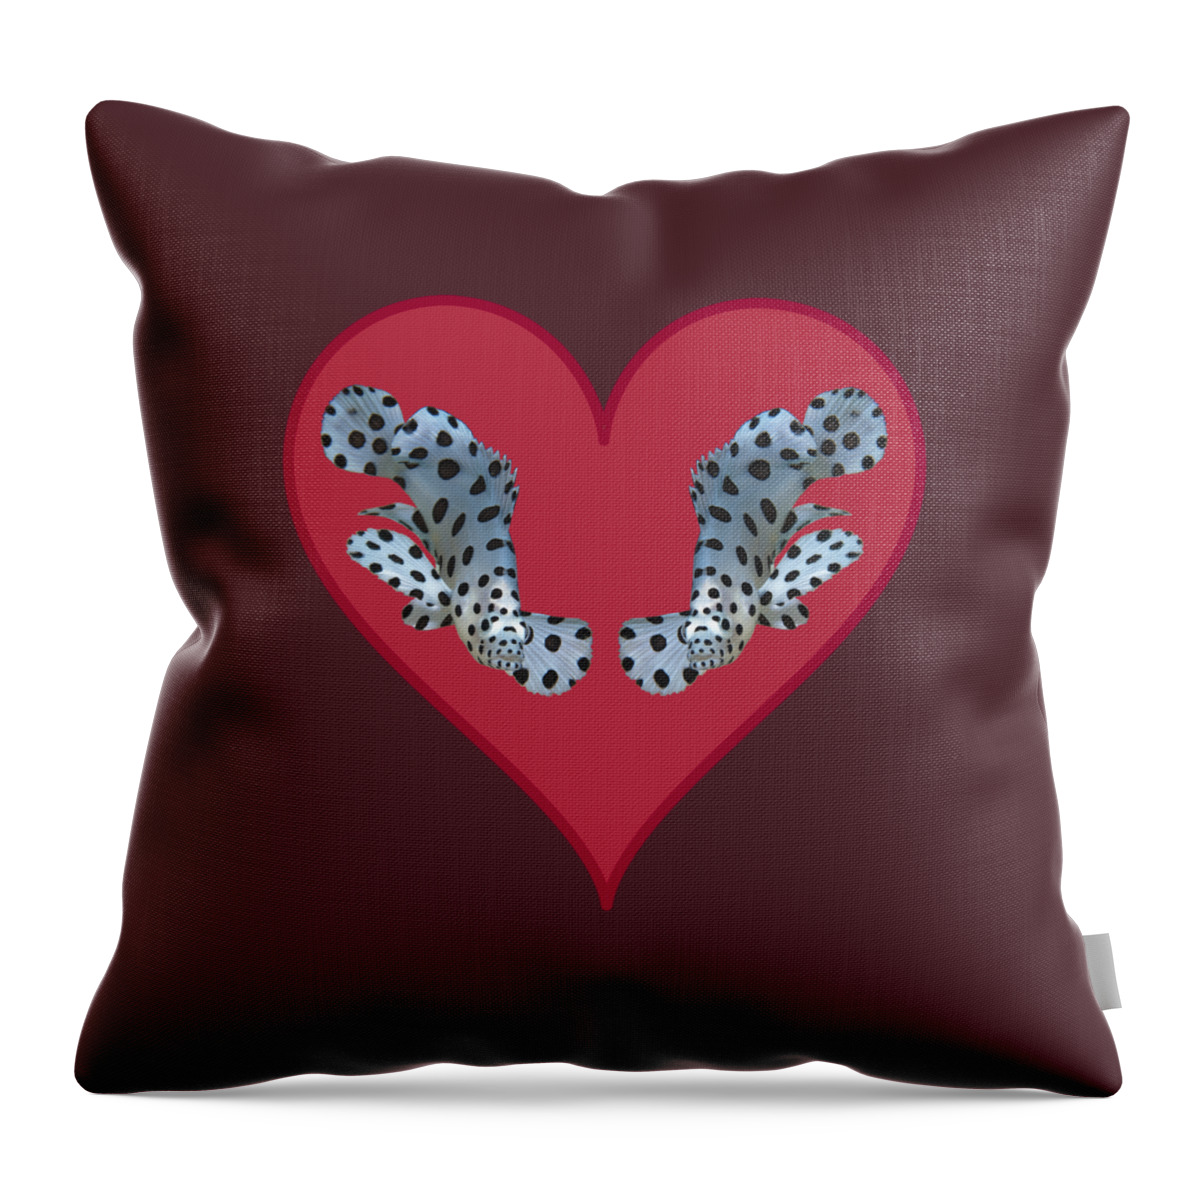 Juvenile Fish Throw Pillow featuring the mixed media Small fish in a red heart - Cute motif of young fish - by Ute Niemann